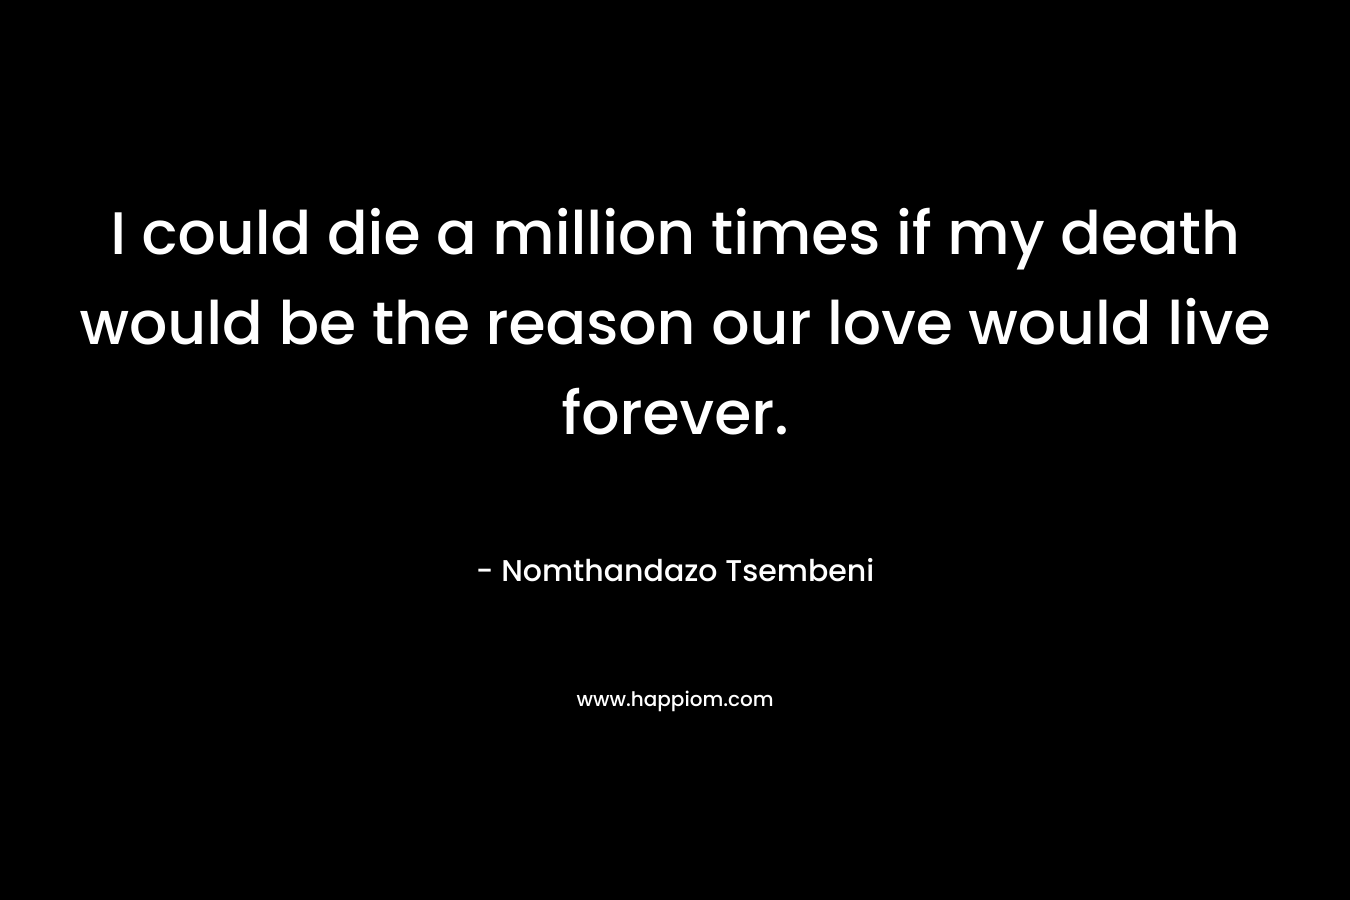 I could die a million times if my death would be the reason our love would live forever.